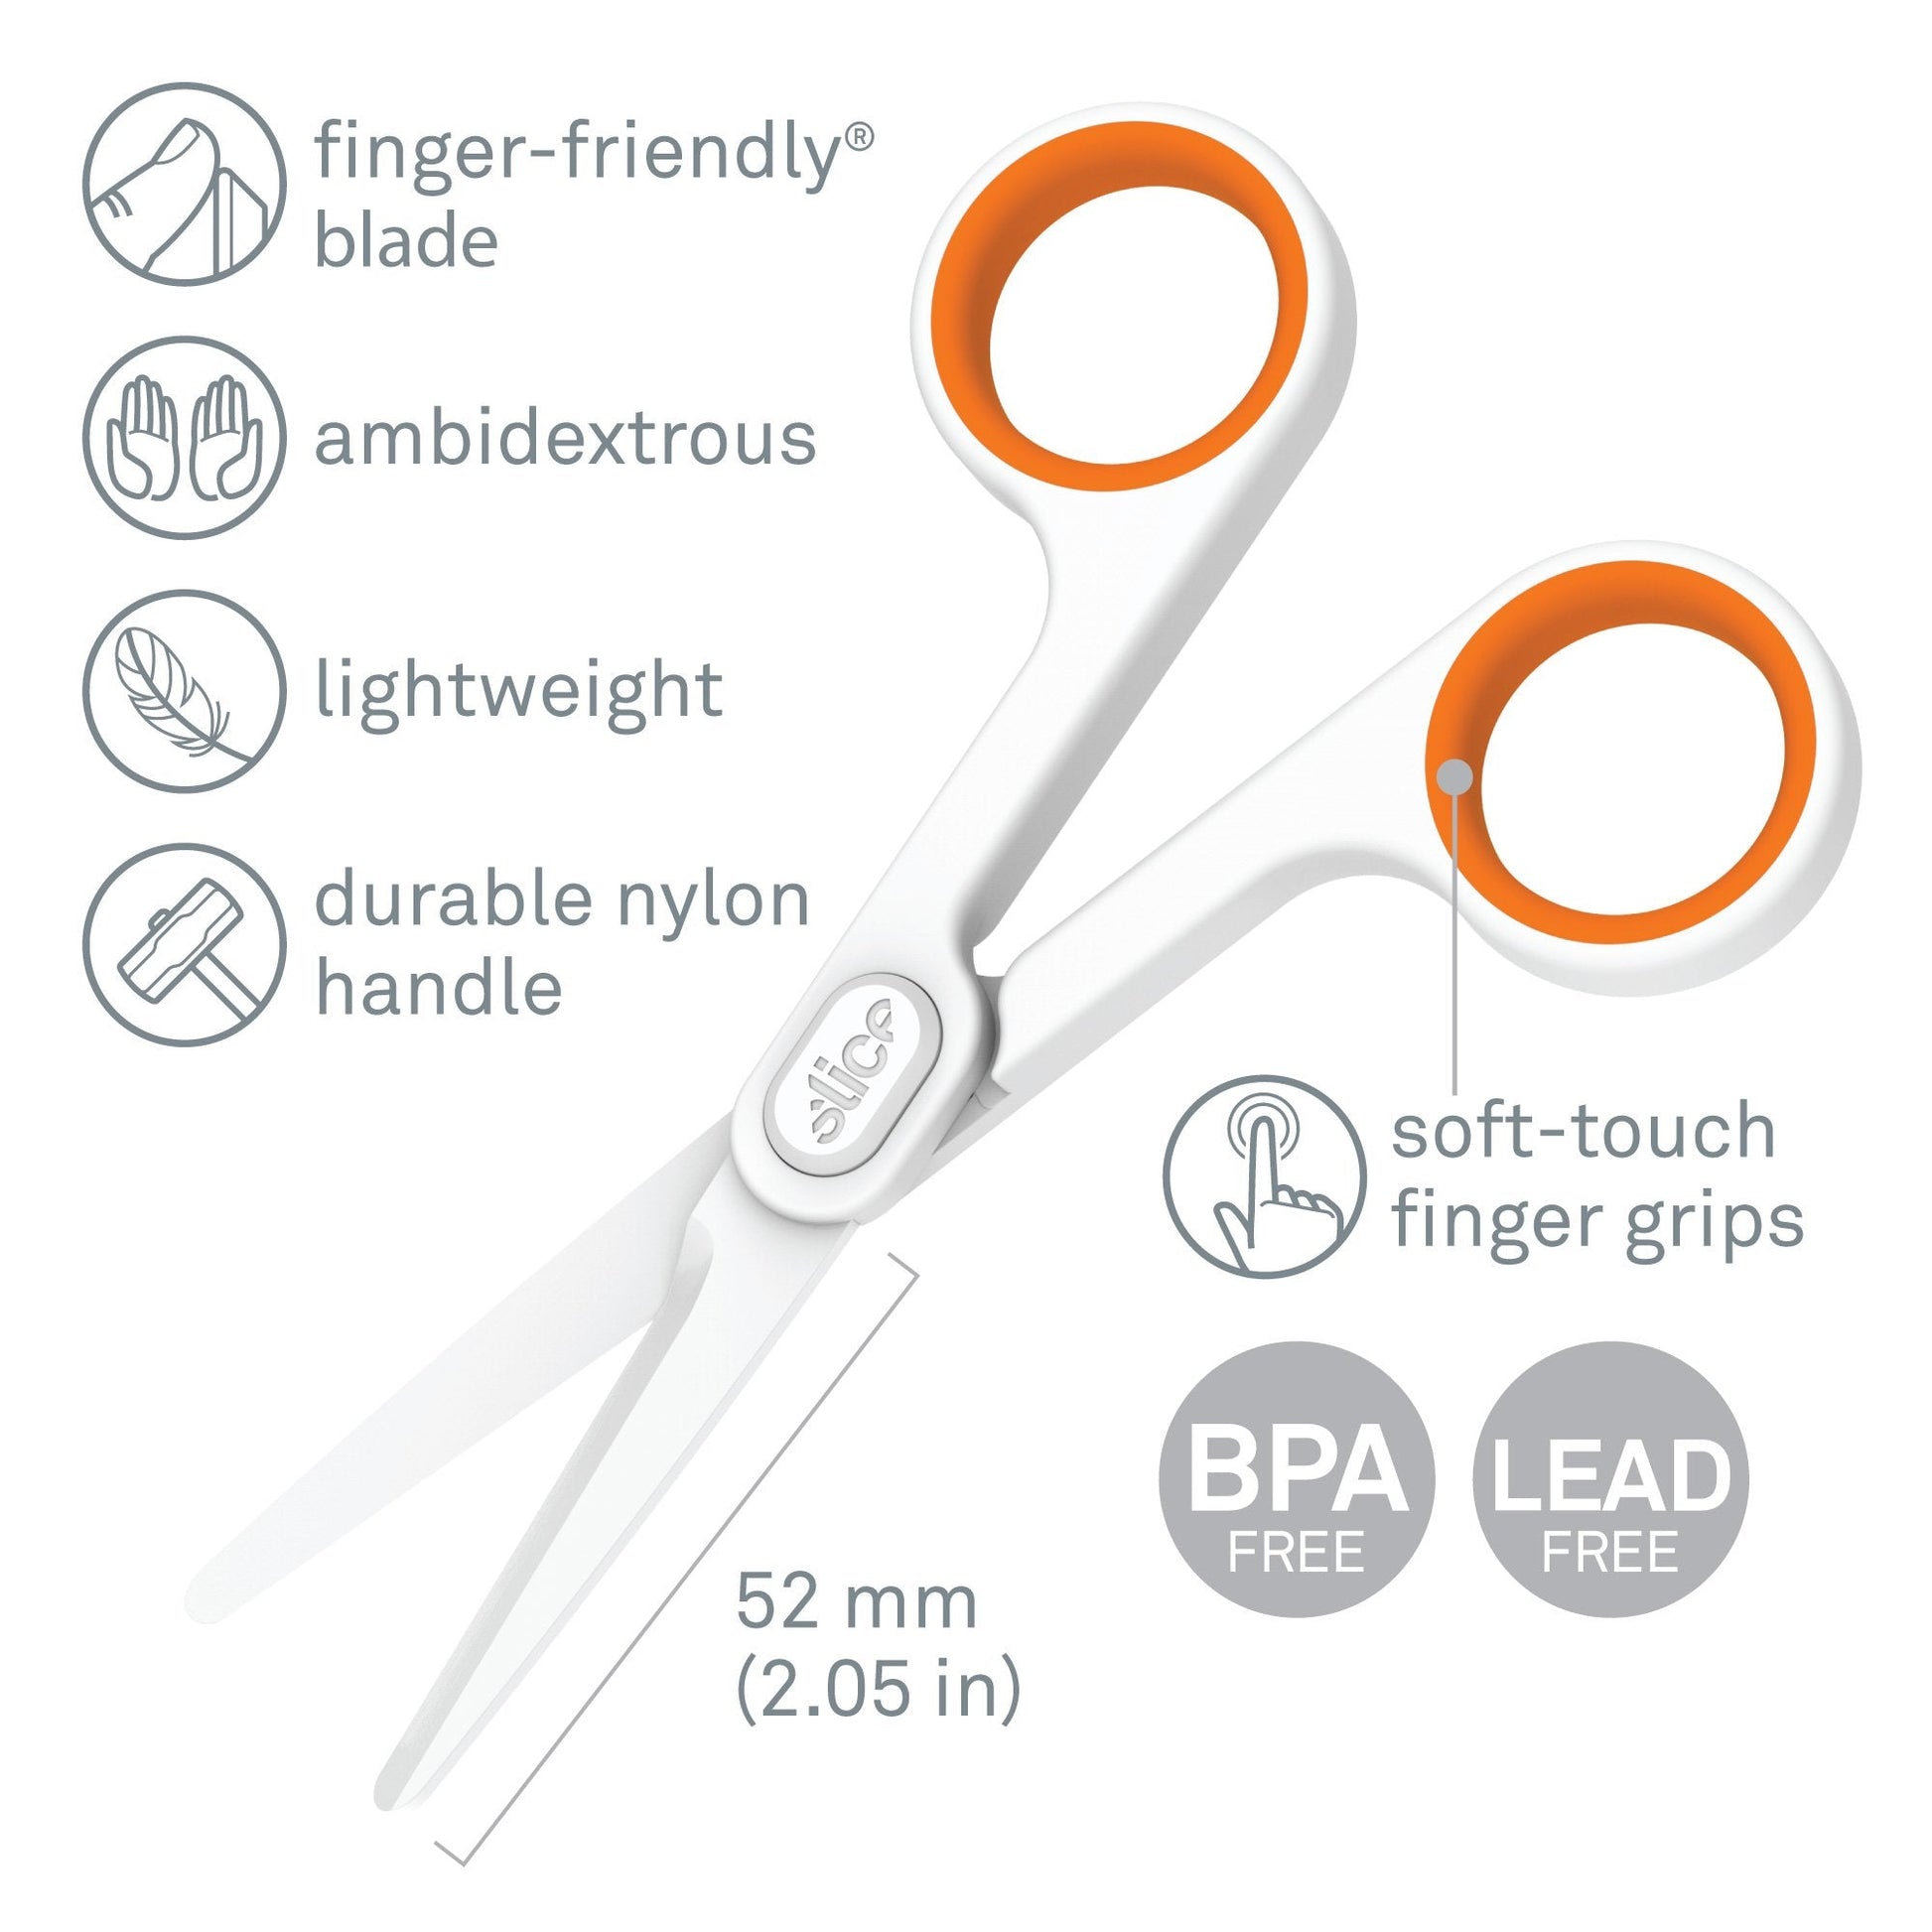 Ceramic Scissors (Small)  Slice – Safety Products Holdings GmbH